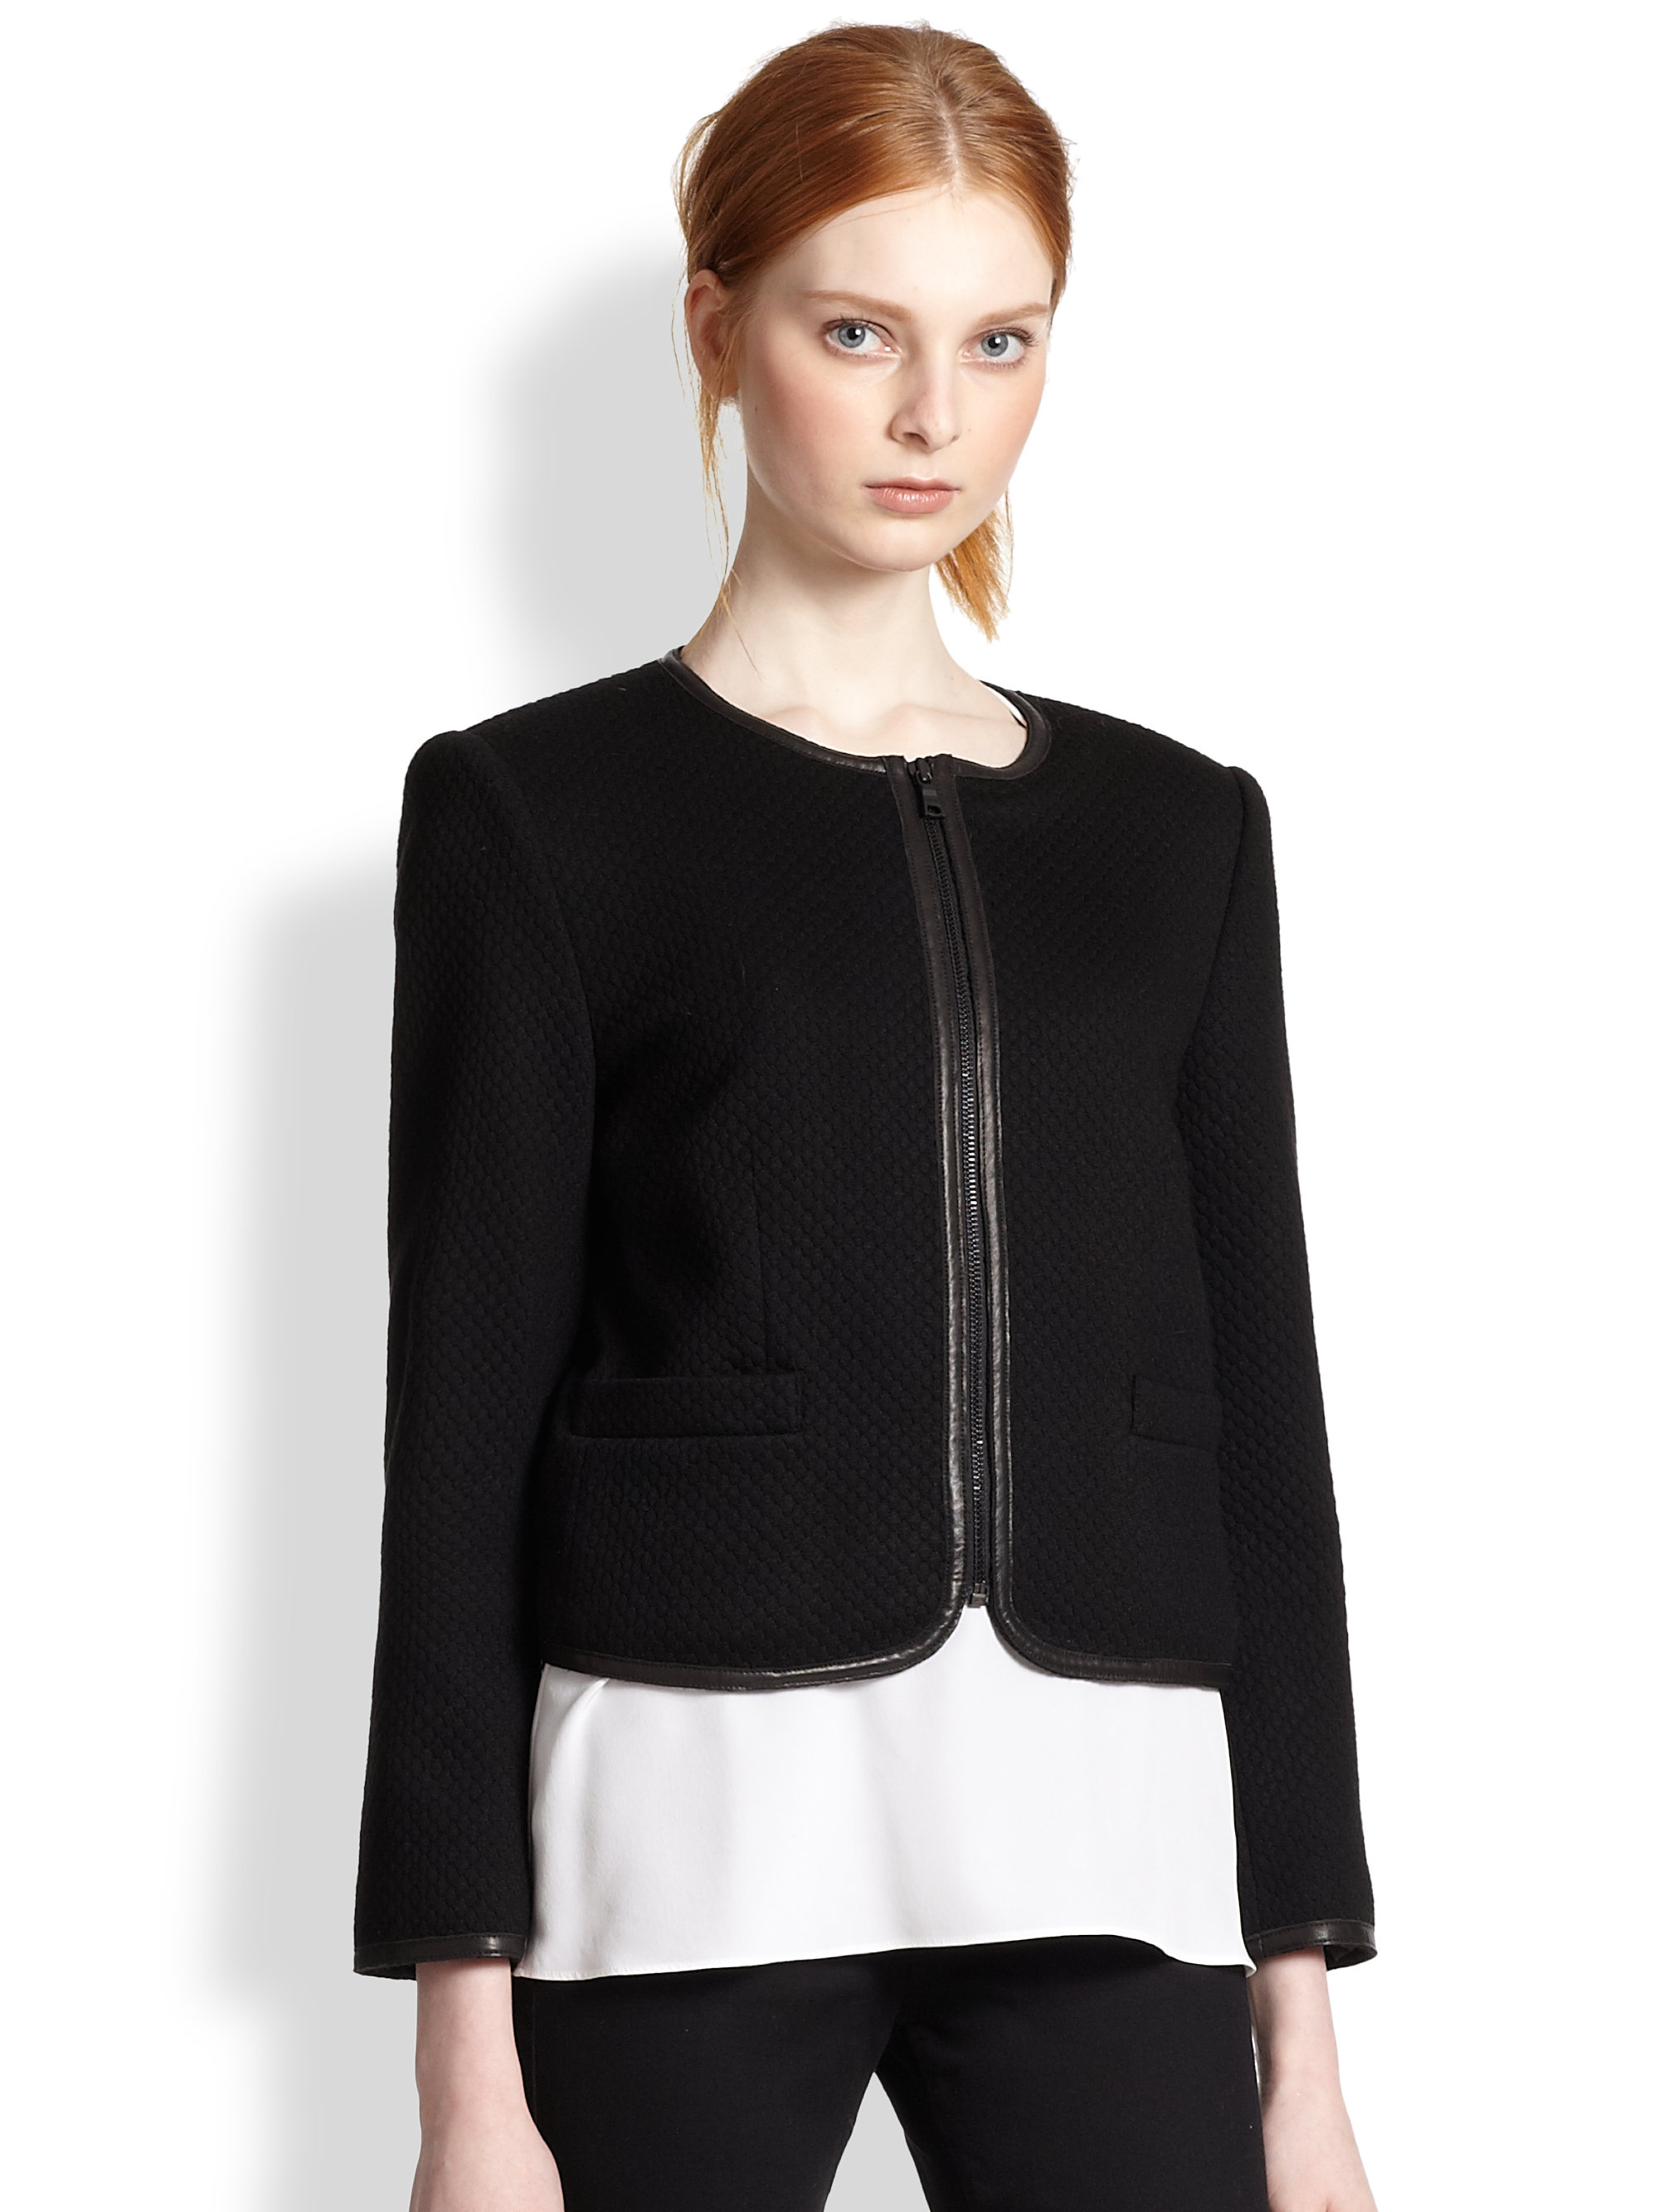 Lyst - Alice + Olivia Boxy Leather-Trimmed Jacket in Black